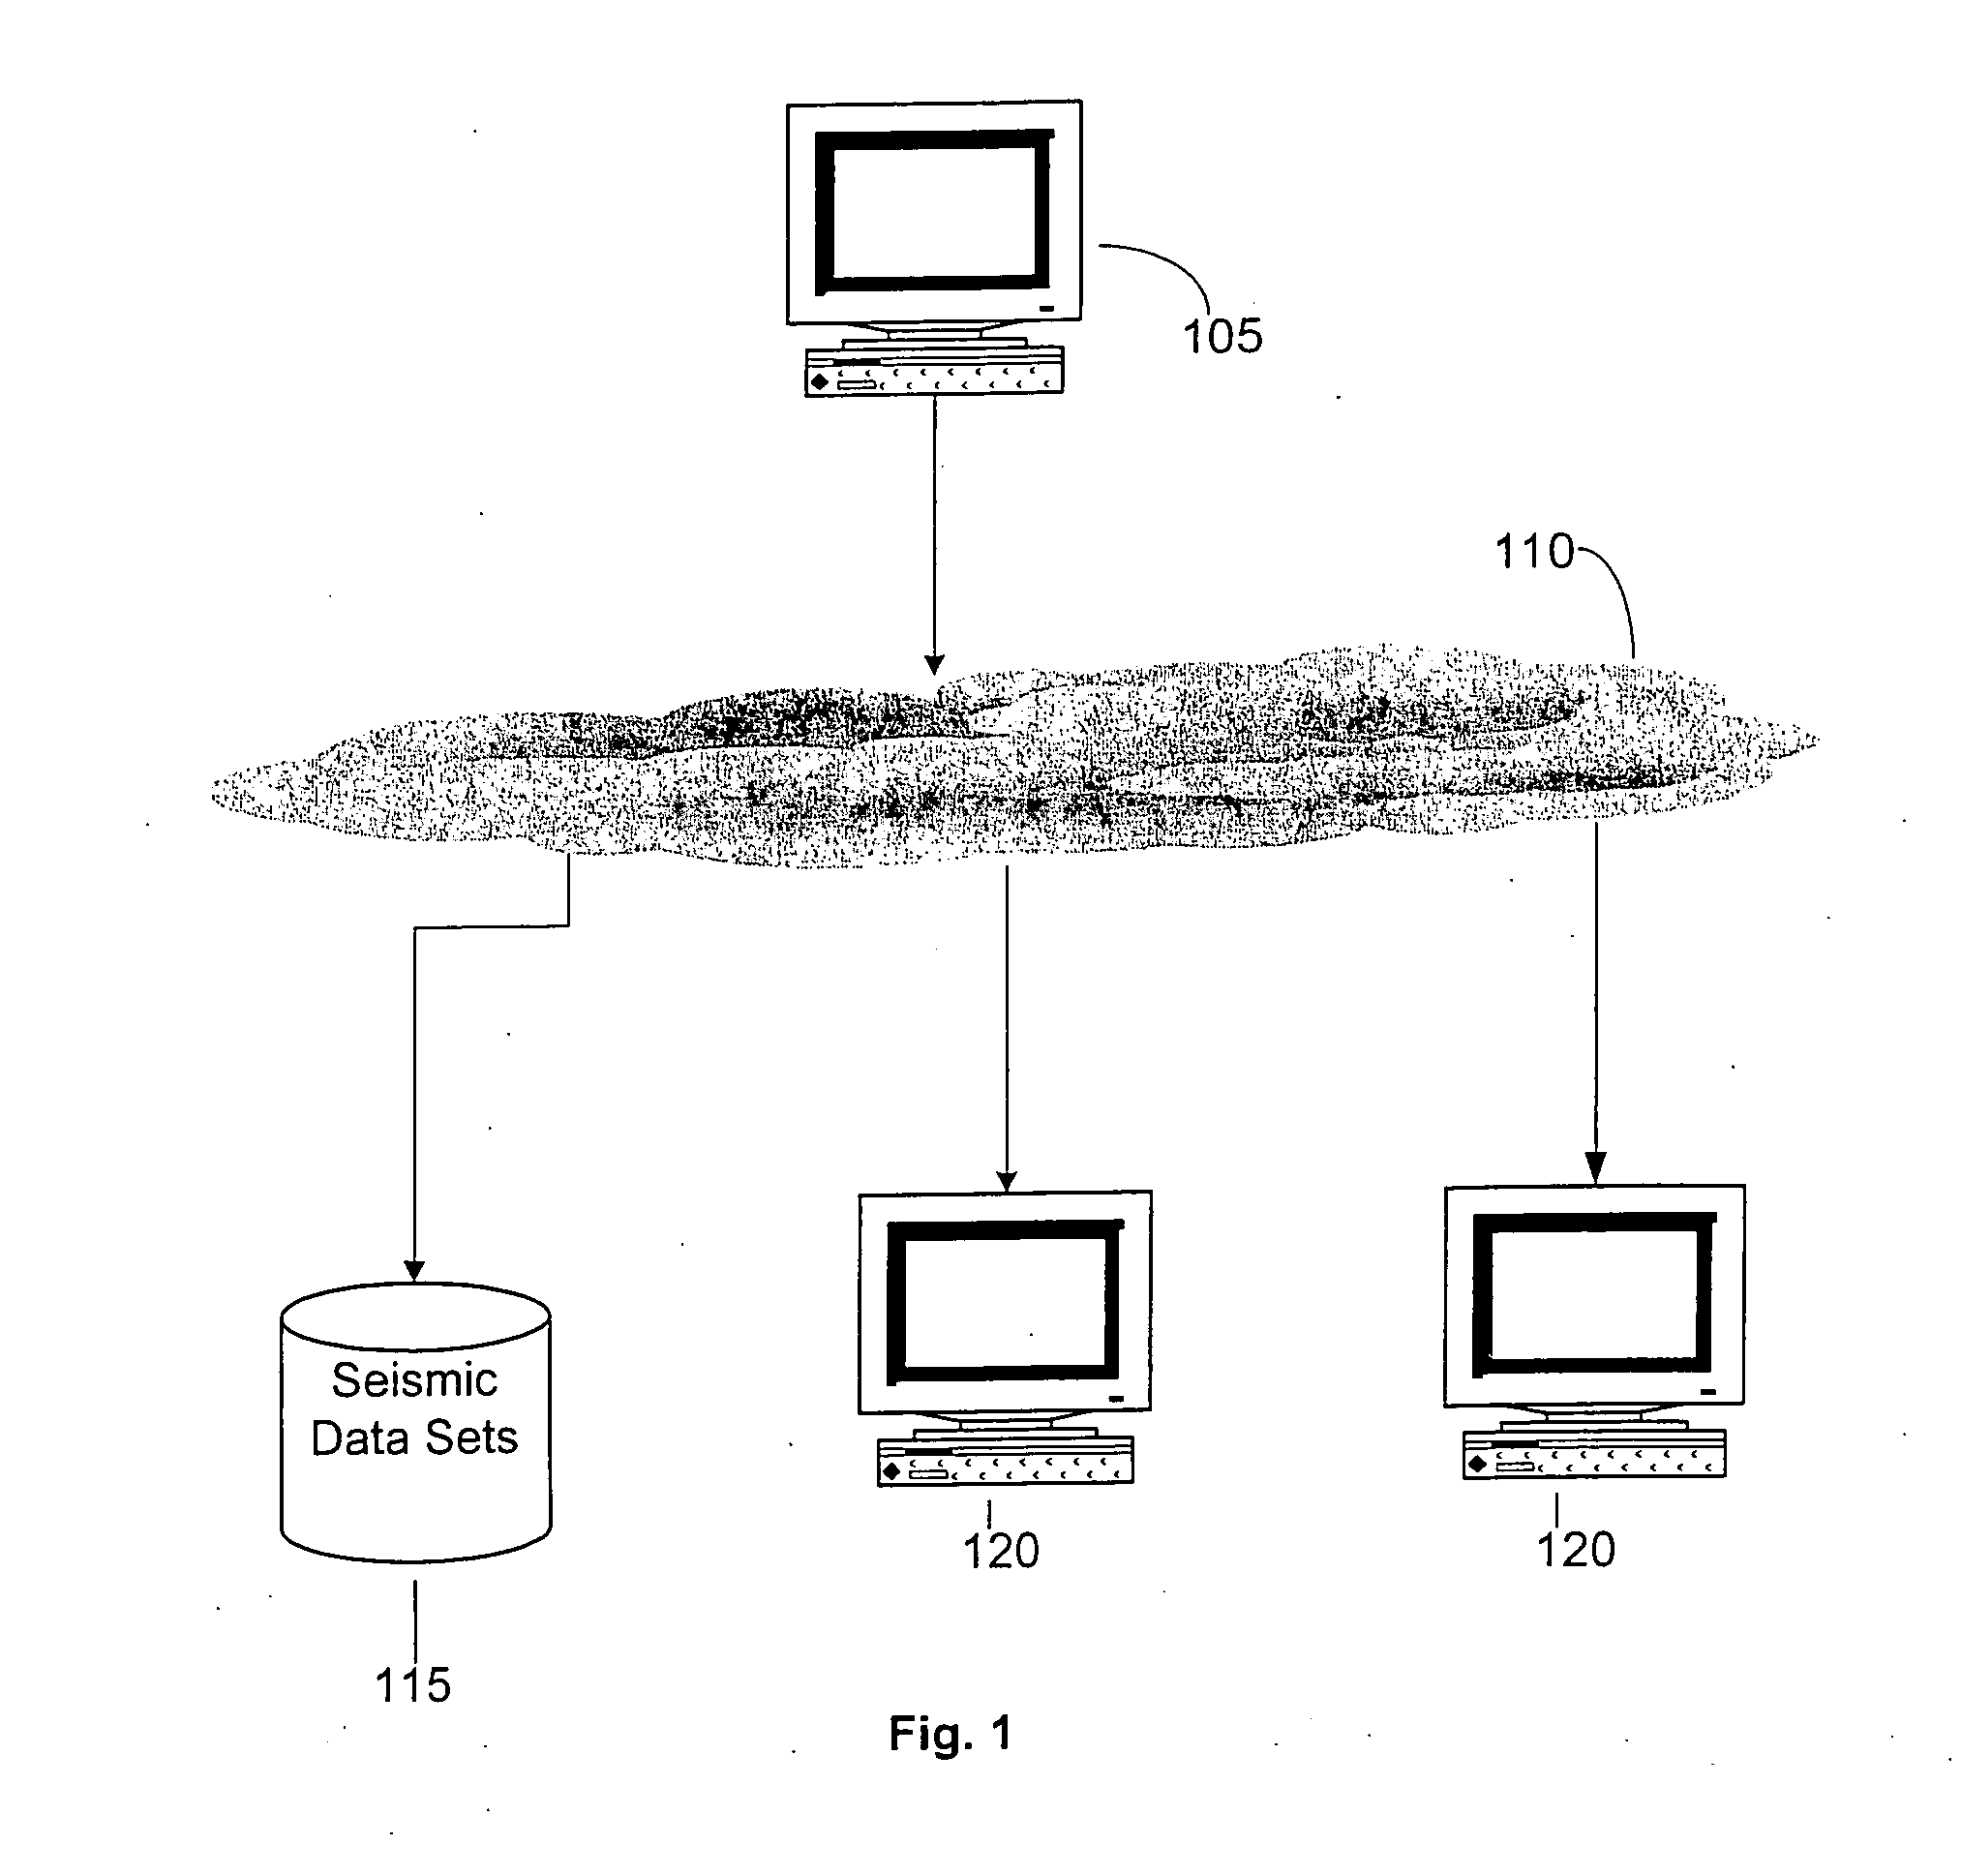 System and method for accessing and analyzing previous generations of seismic data